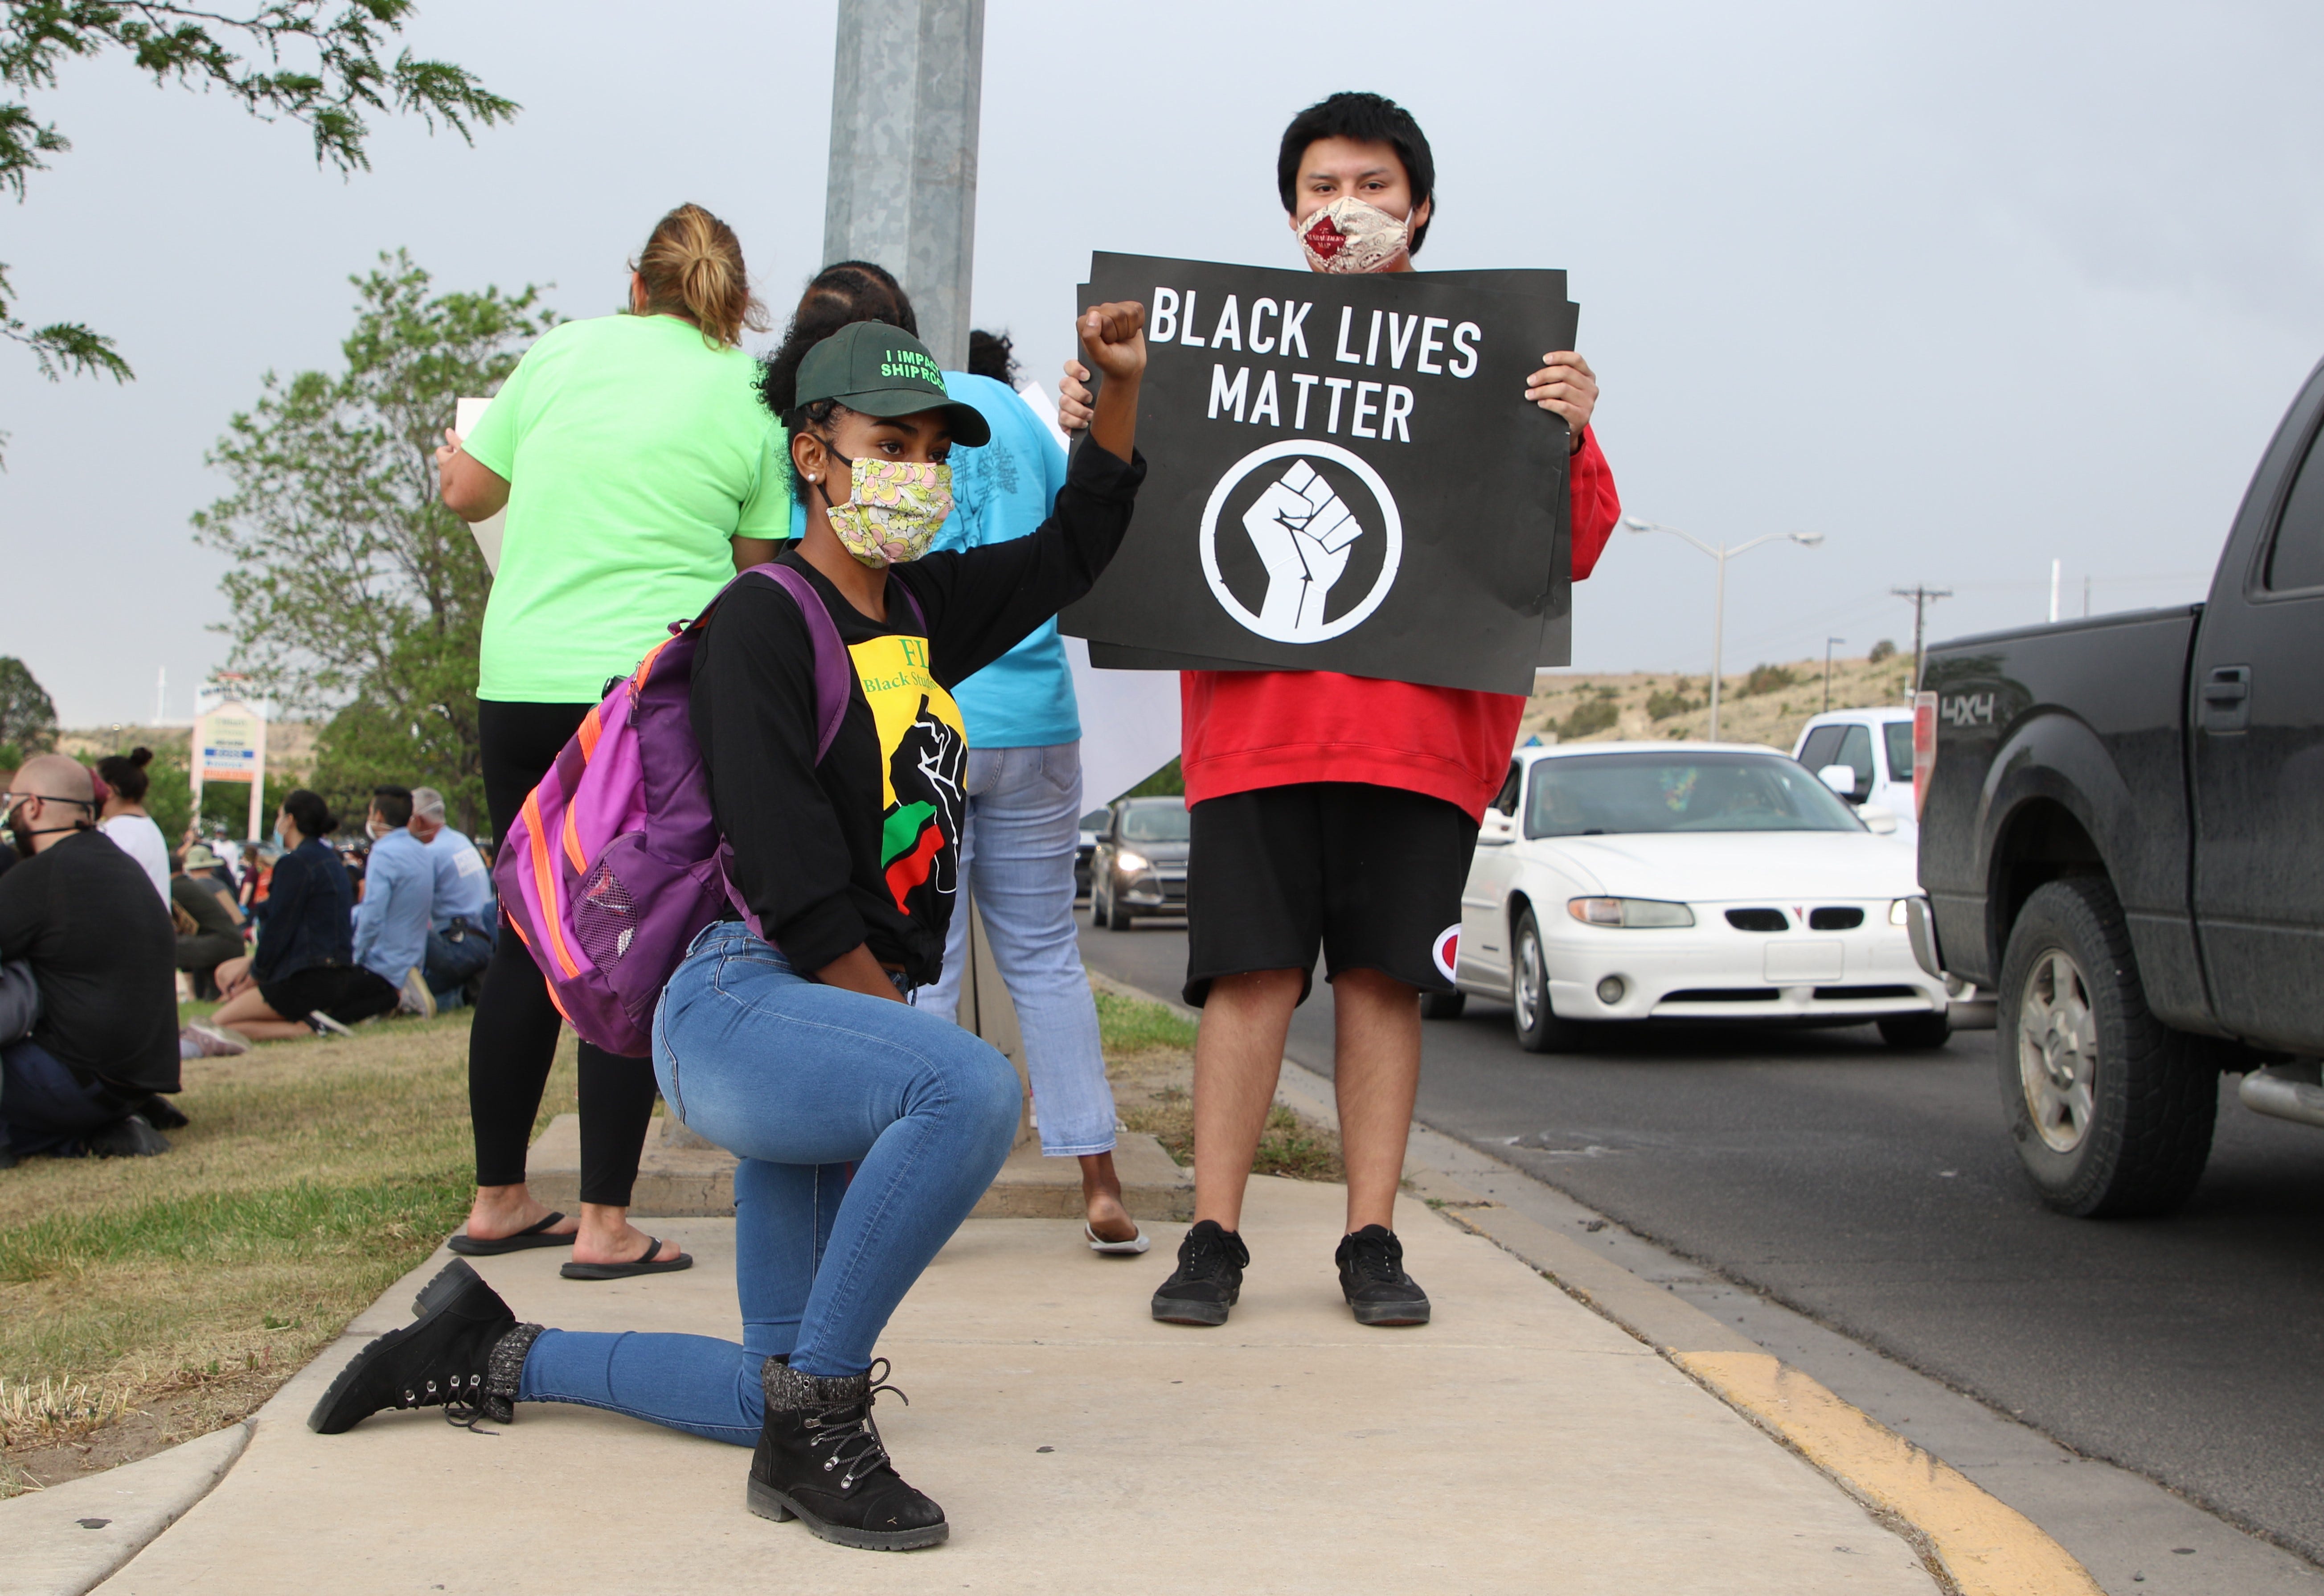 Rhakel Lewis Adams, left, takes a knee in solidarity while Zubick Taliman holds a sign in protest on June 1 near Animas Valley Mall in Farmington that called for justice in George Floyd's death in Minneapolis.